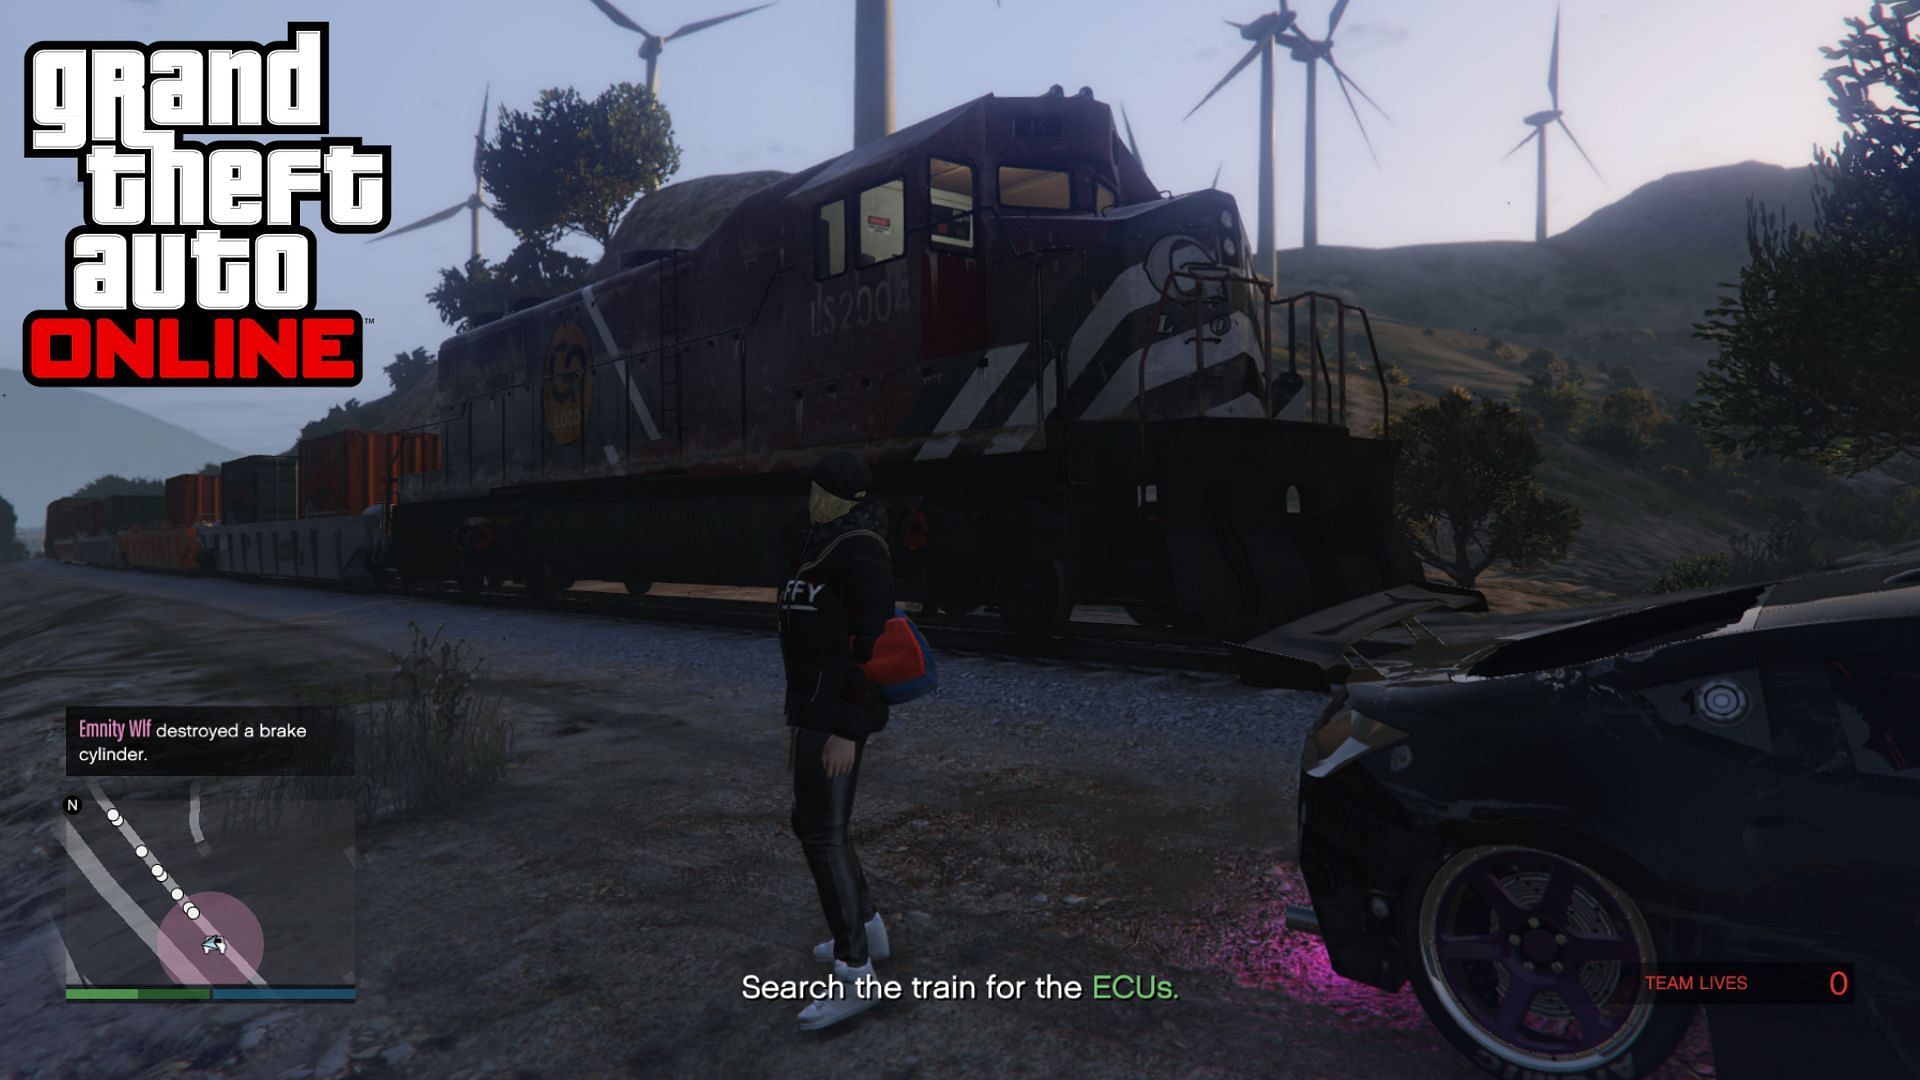 GTA Online players have performed a lot of antics in their attempt at boarding trains. Image via u/Barberz31 on Reddit.